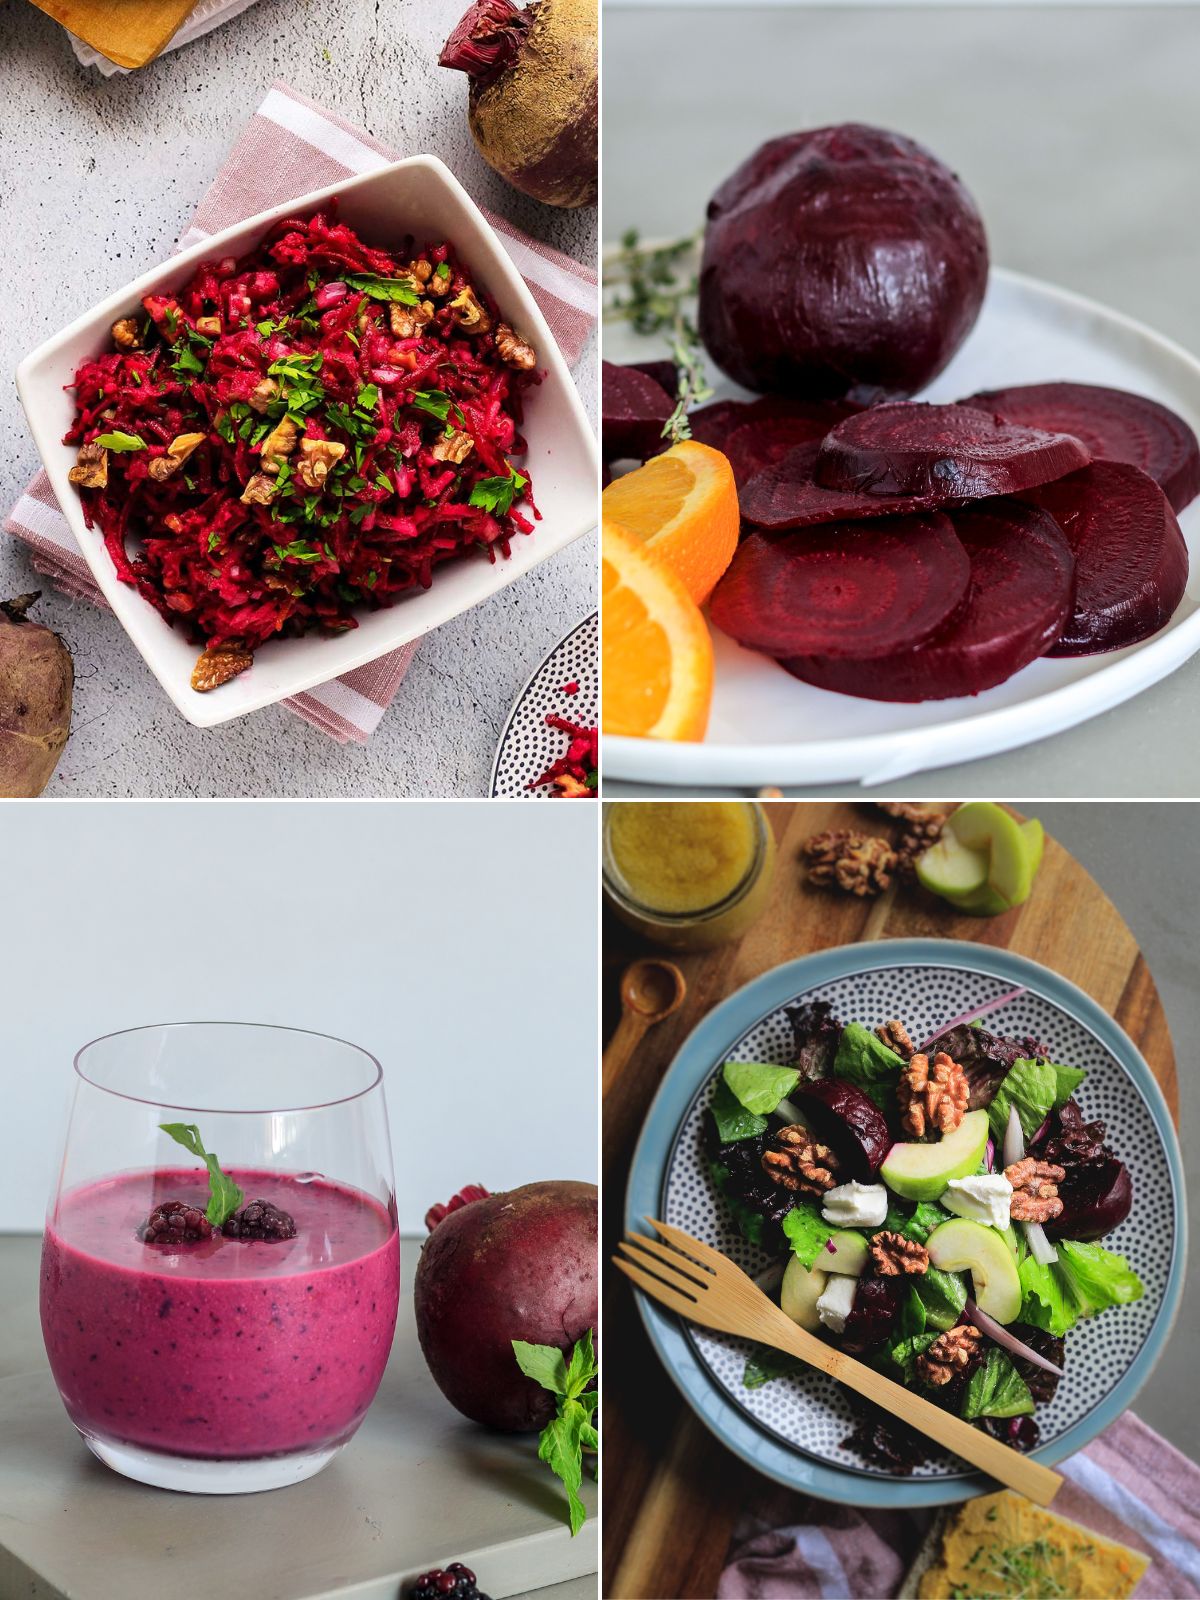 A collage of images of beet dishes including a salad, roasted, and a smoothie.